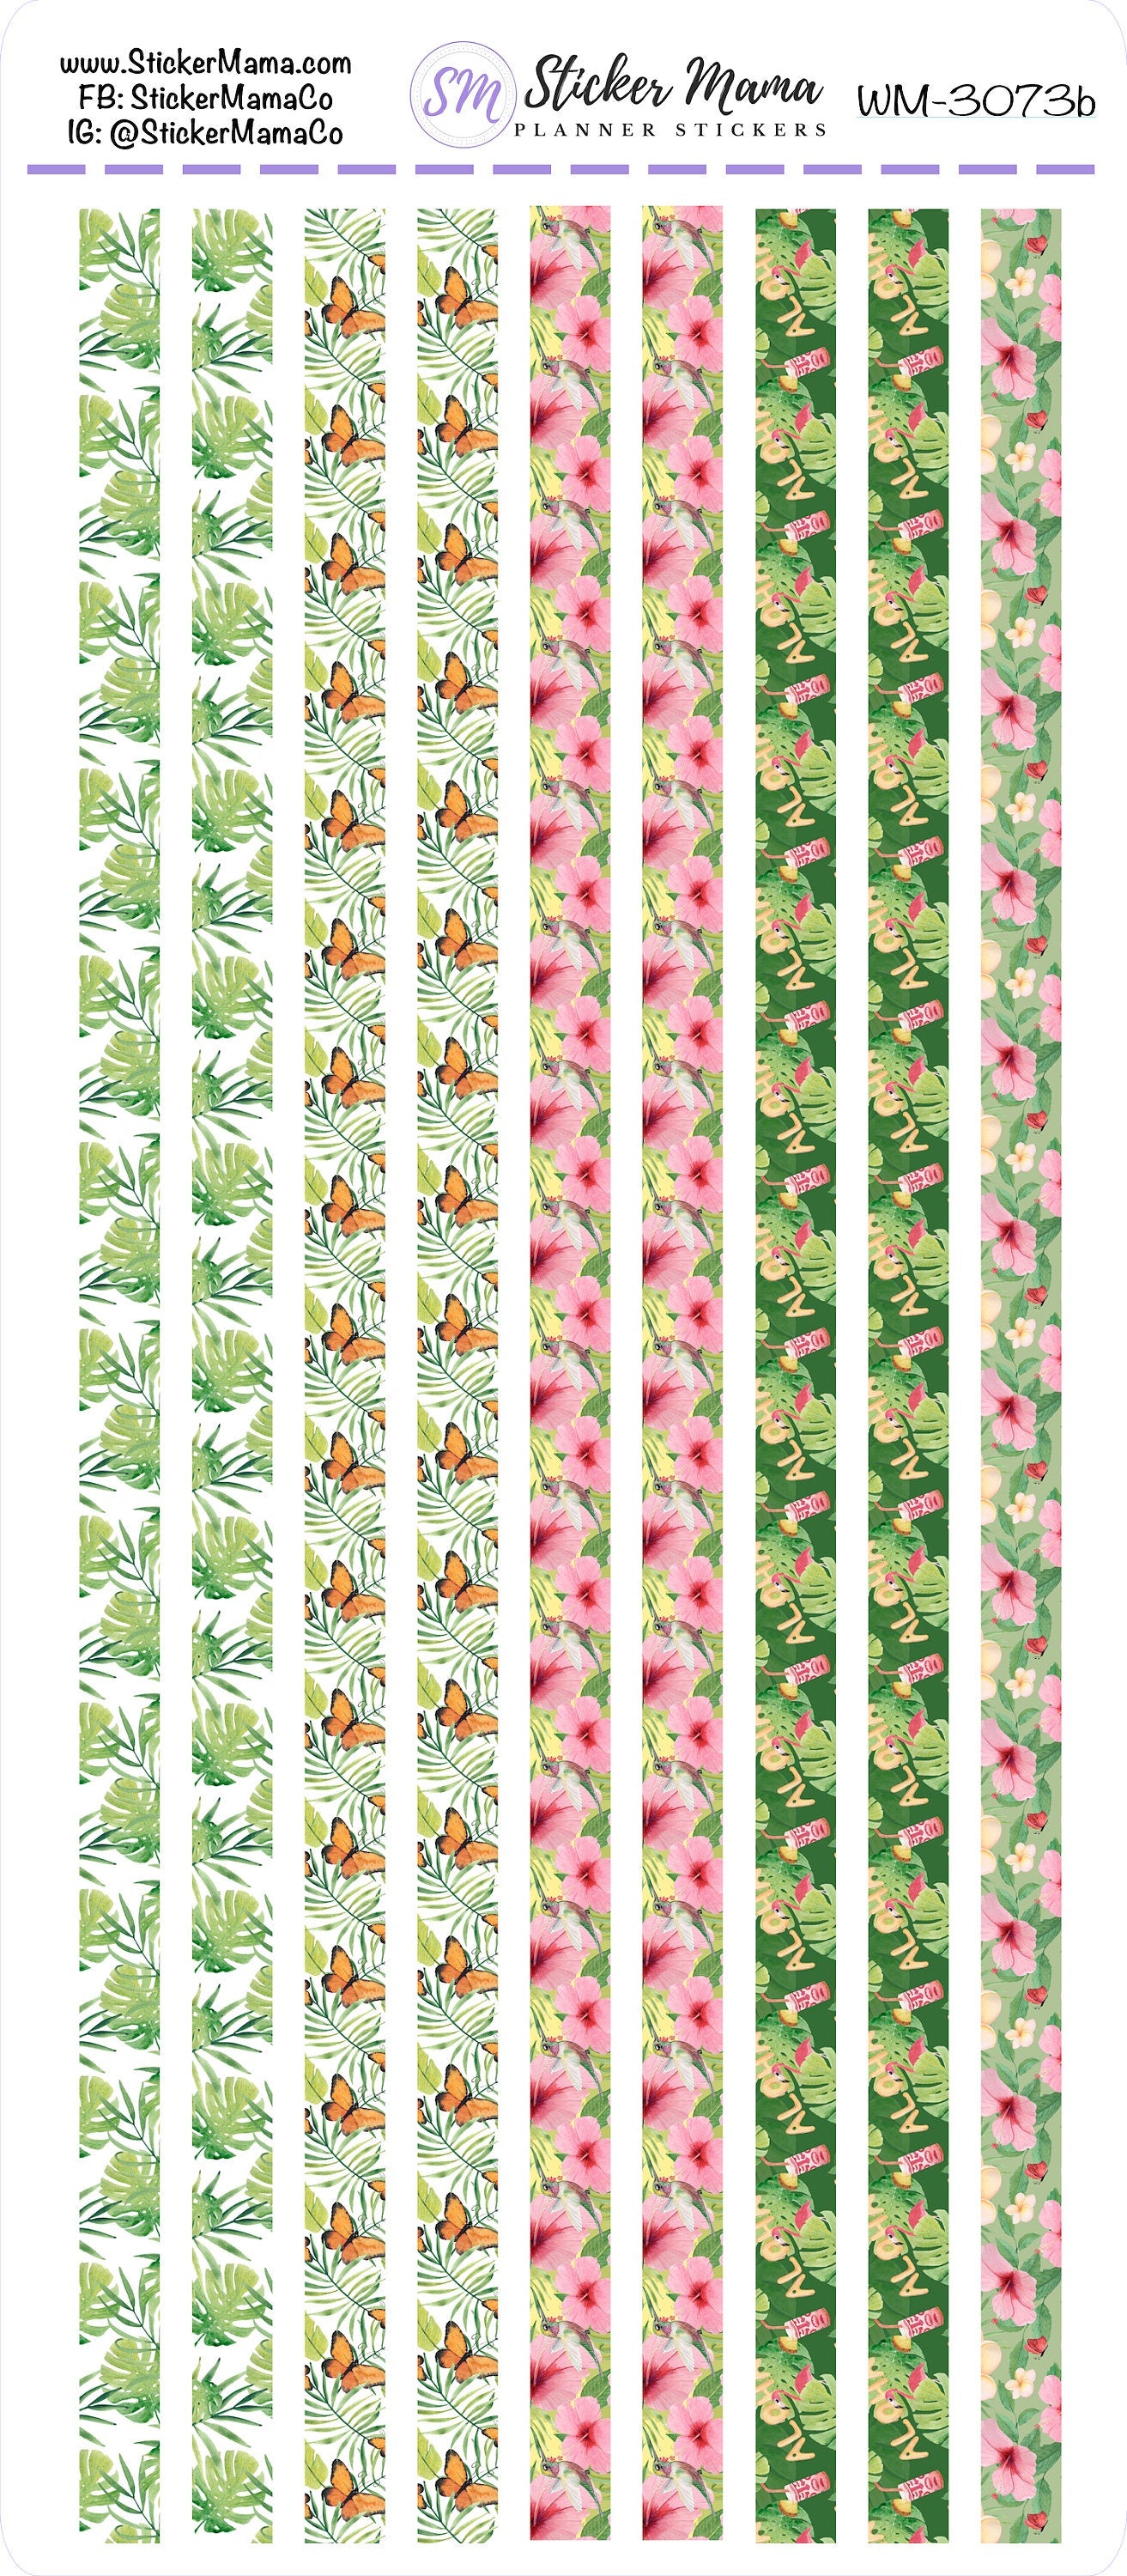 W-3073 - WASHI STICKERS - Tropical Summer - Planner Stickers - Washi for Planners